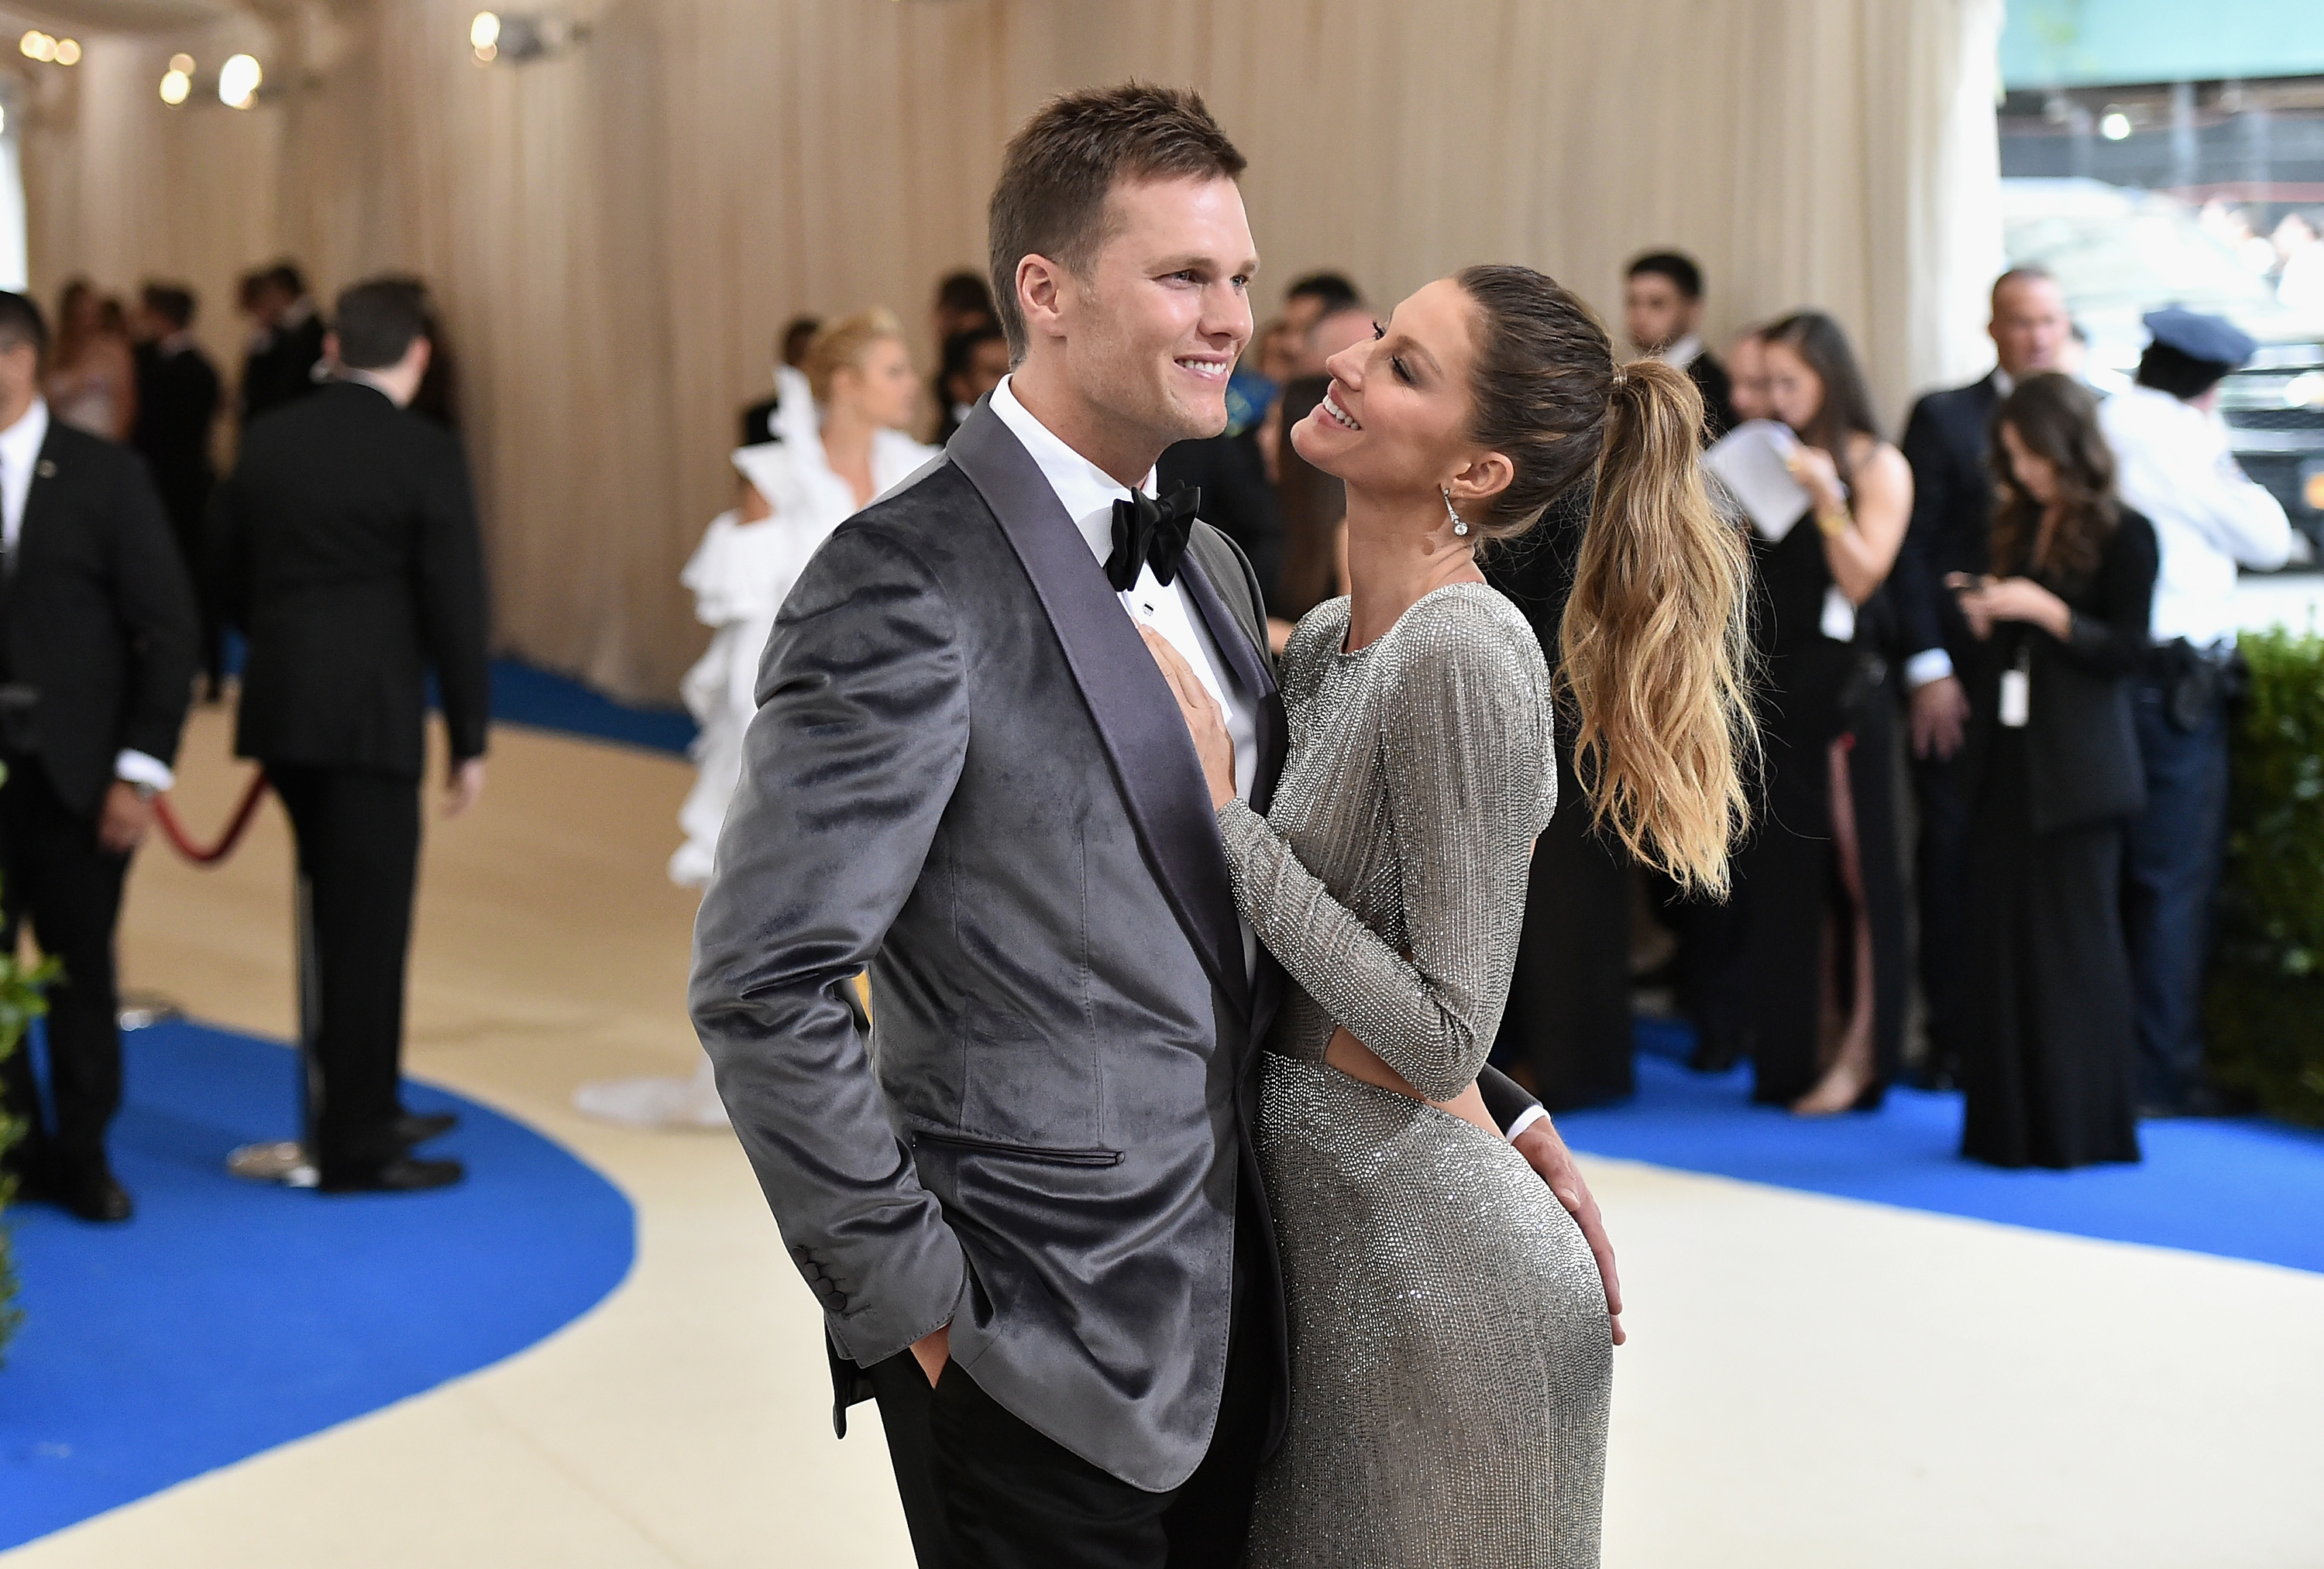 Tom Brady and Gisele Bündchen posing together, he in a tuxedo and she in a shimmering gown